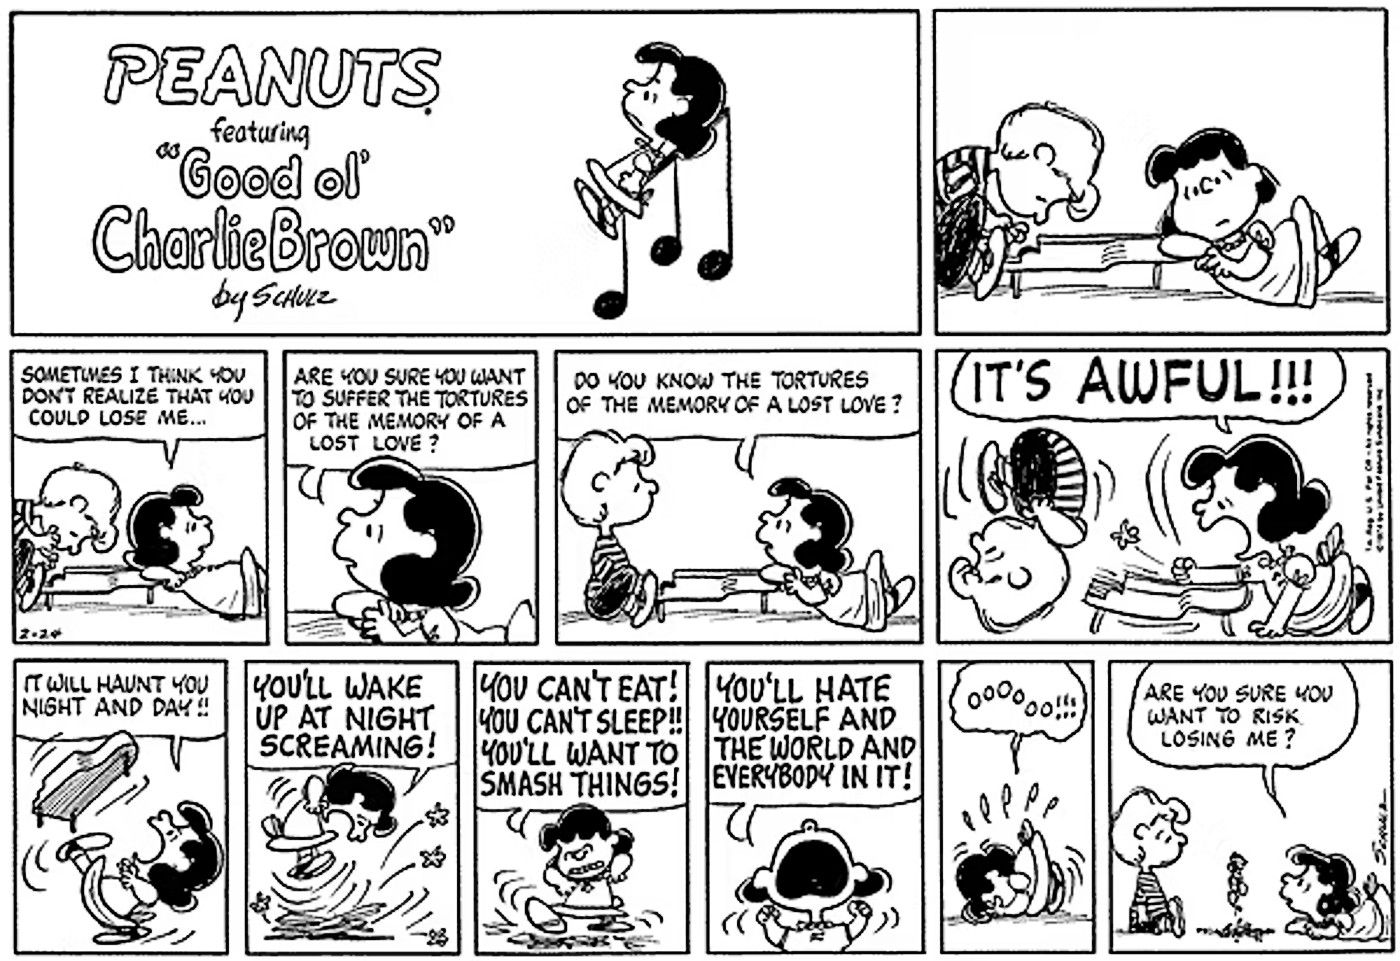 Peanuts, Lucy tries to get Schroeder to recognize how much he'll miss her if she stops loving him